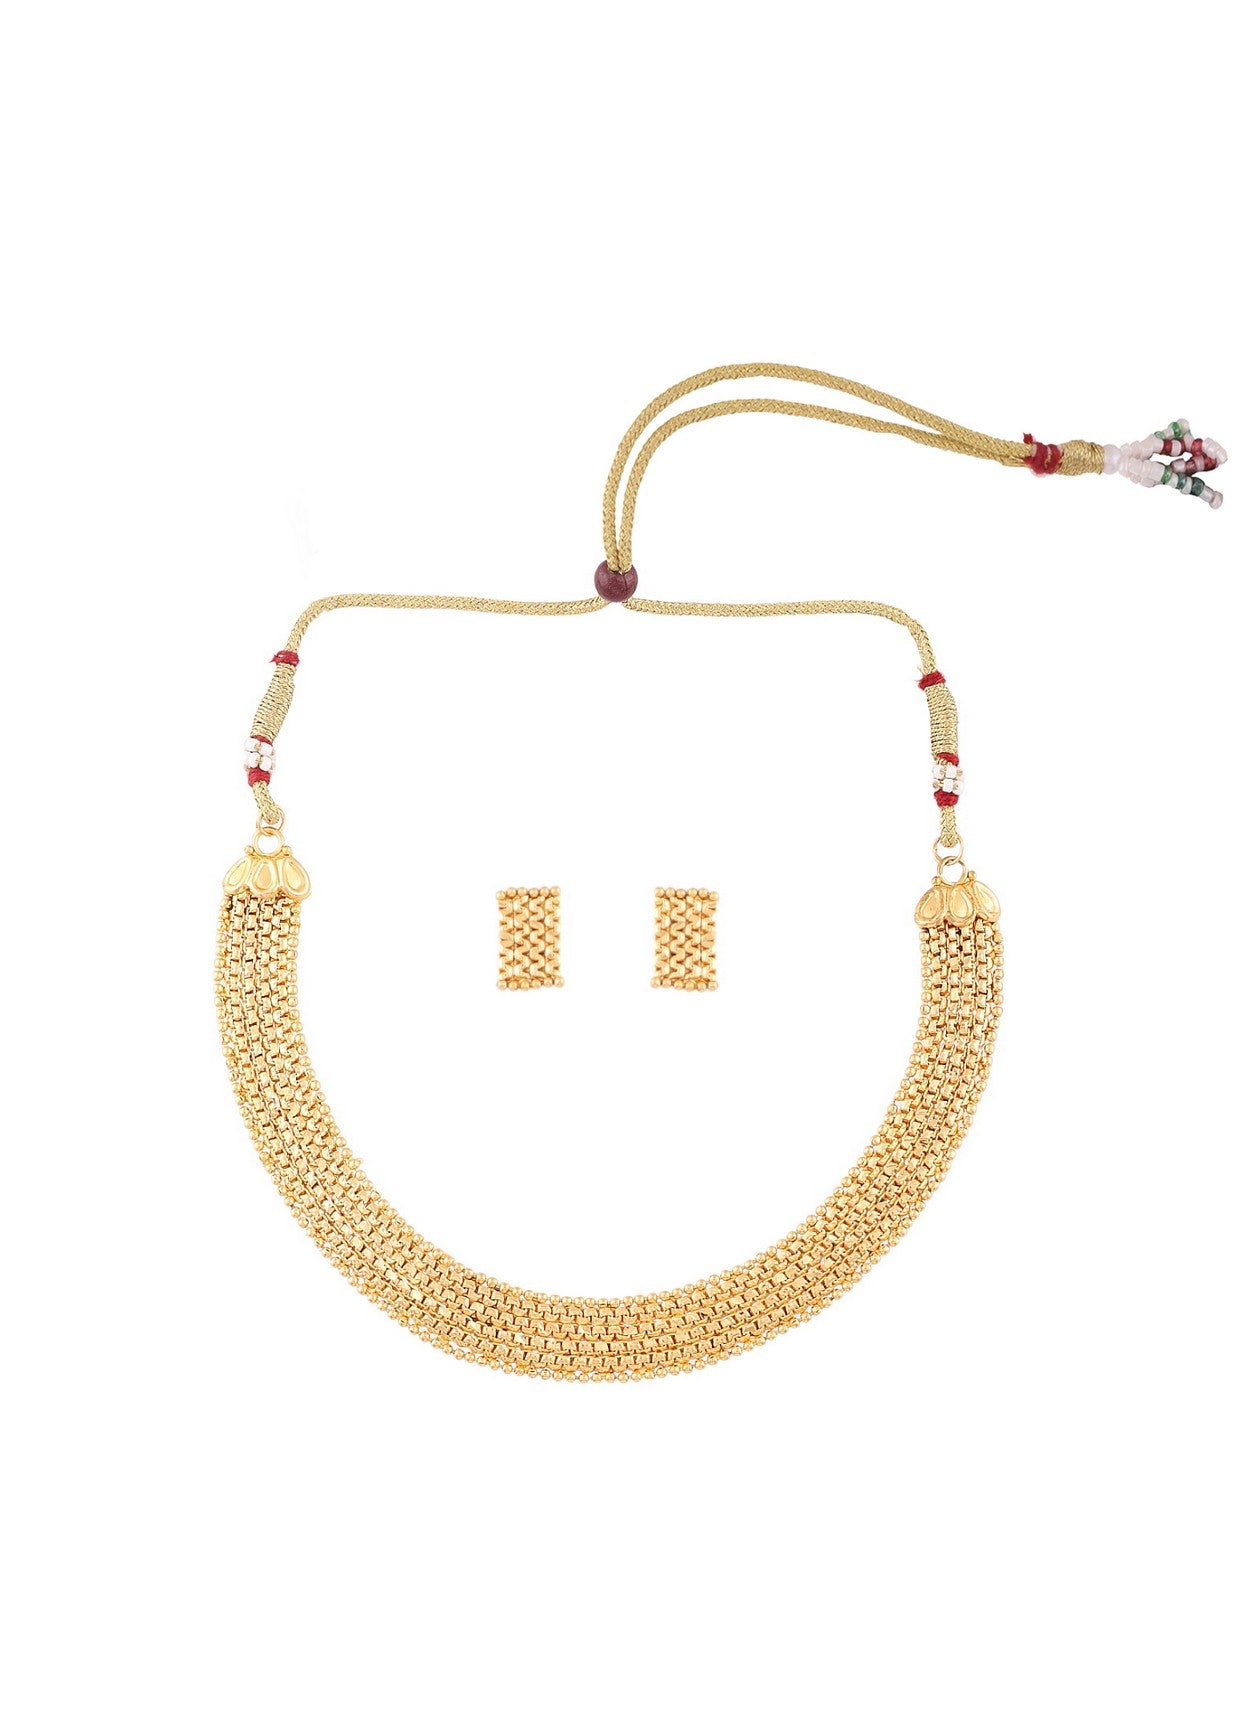 Gold-Plated Siample Handmade Kalkati Set With Matching Earring